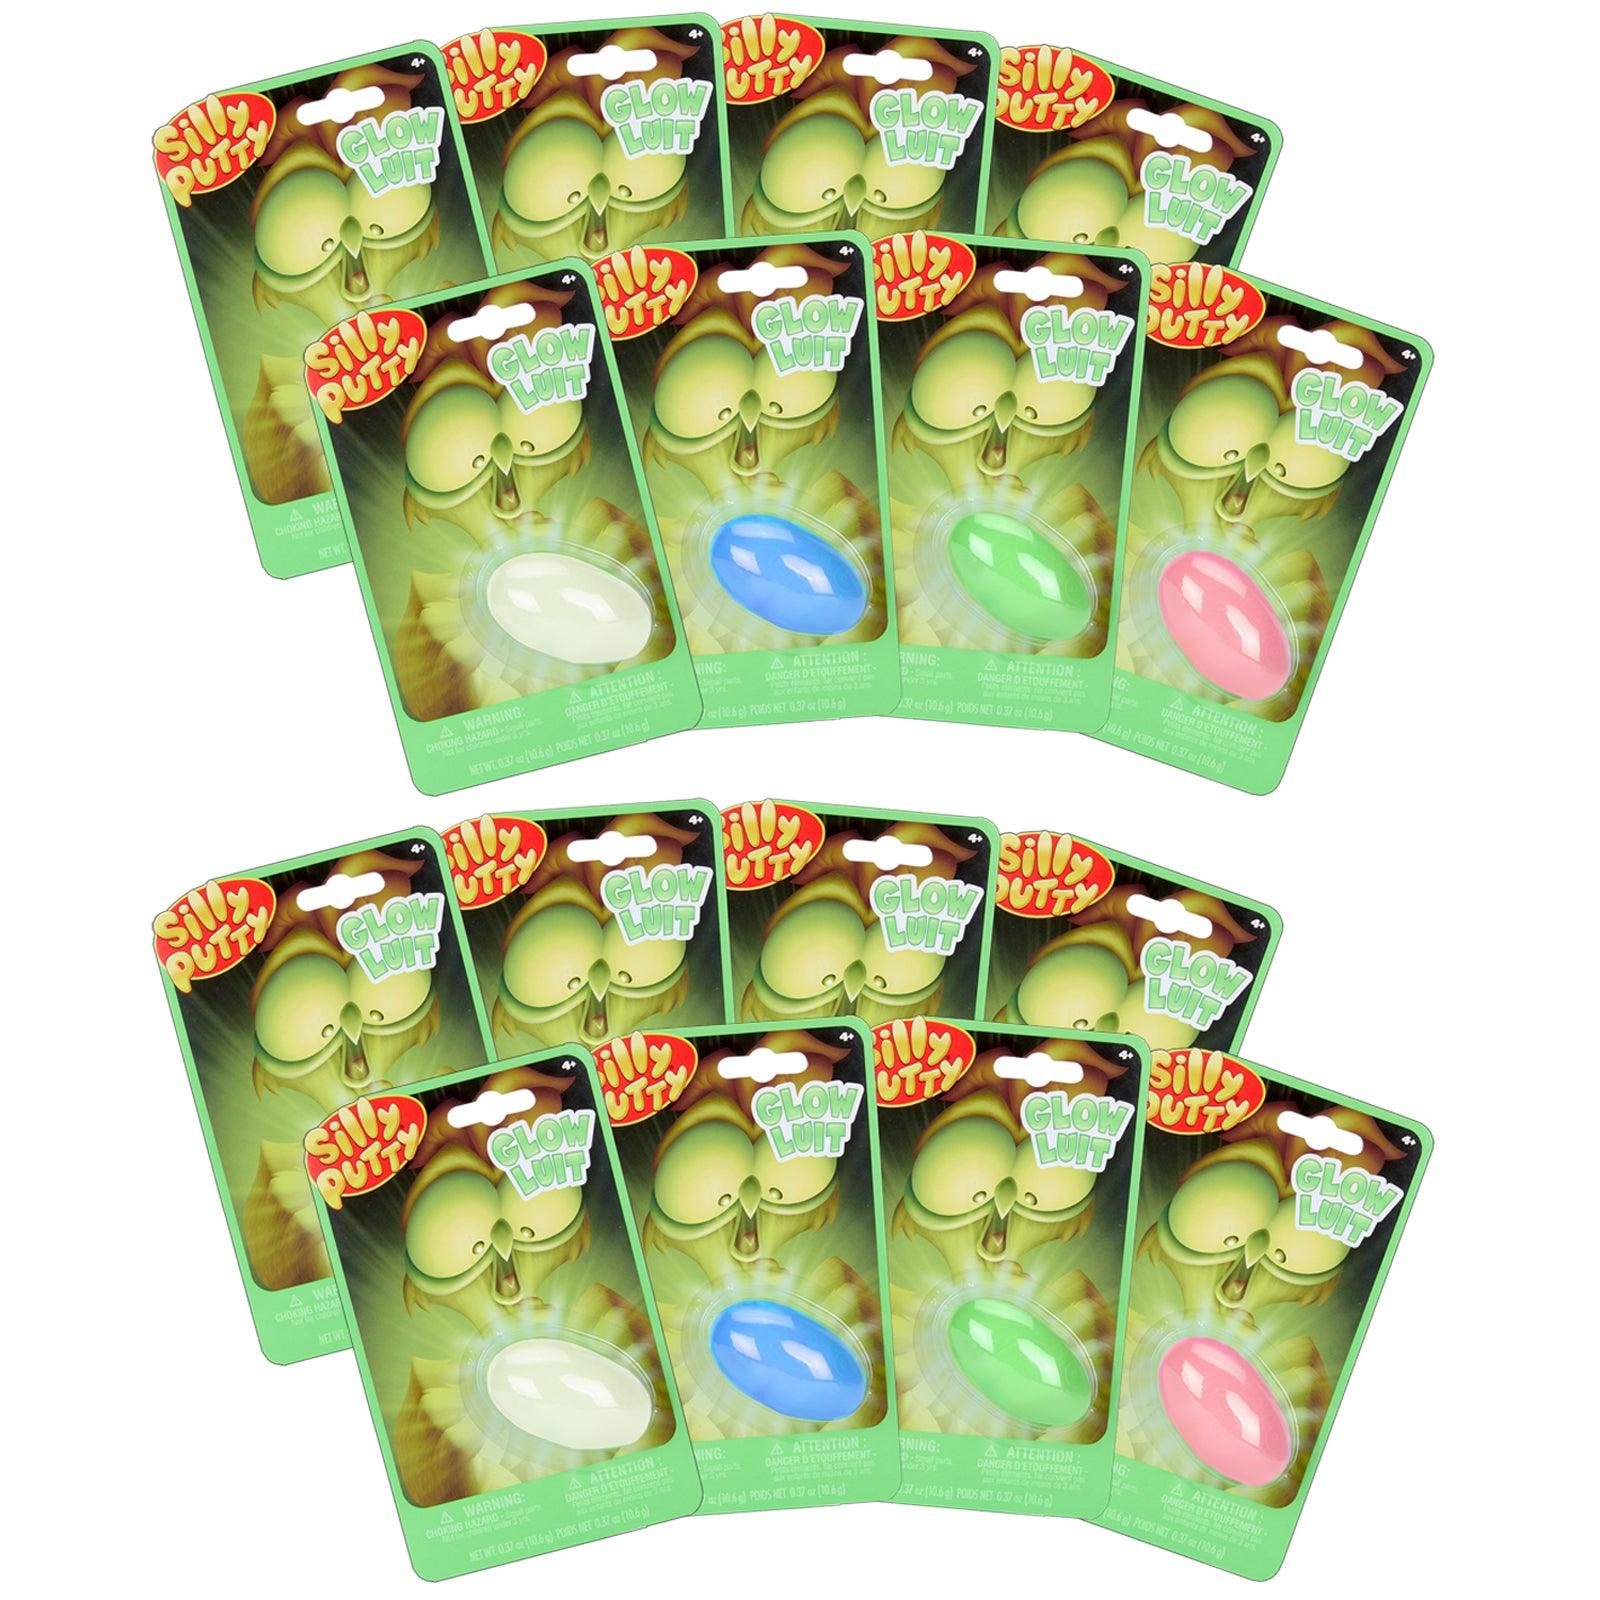 Glow-in-the-Dark Silly Putty, Assorted Colors, Pack of 16 - Loomini